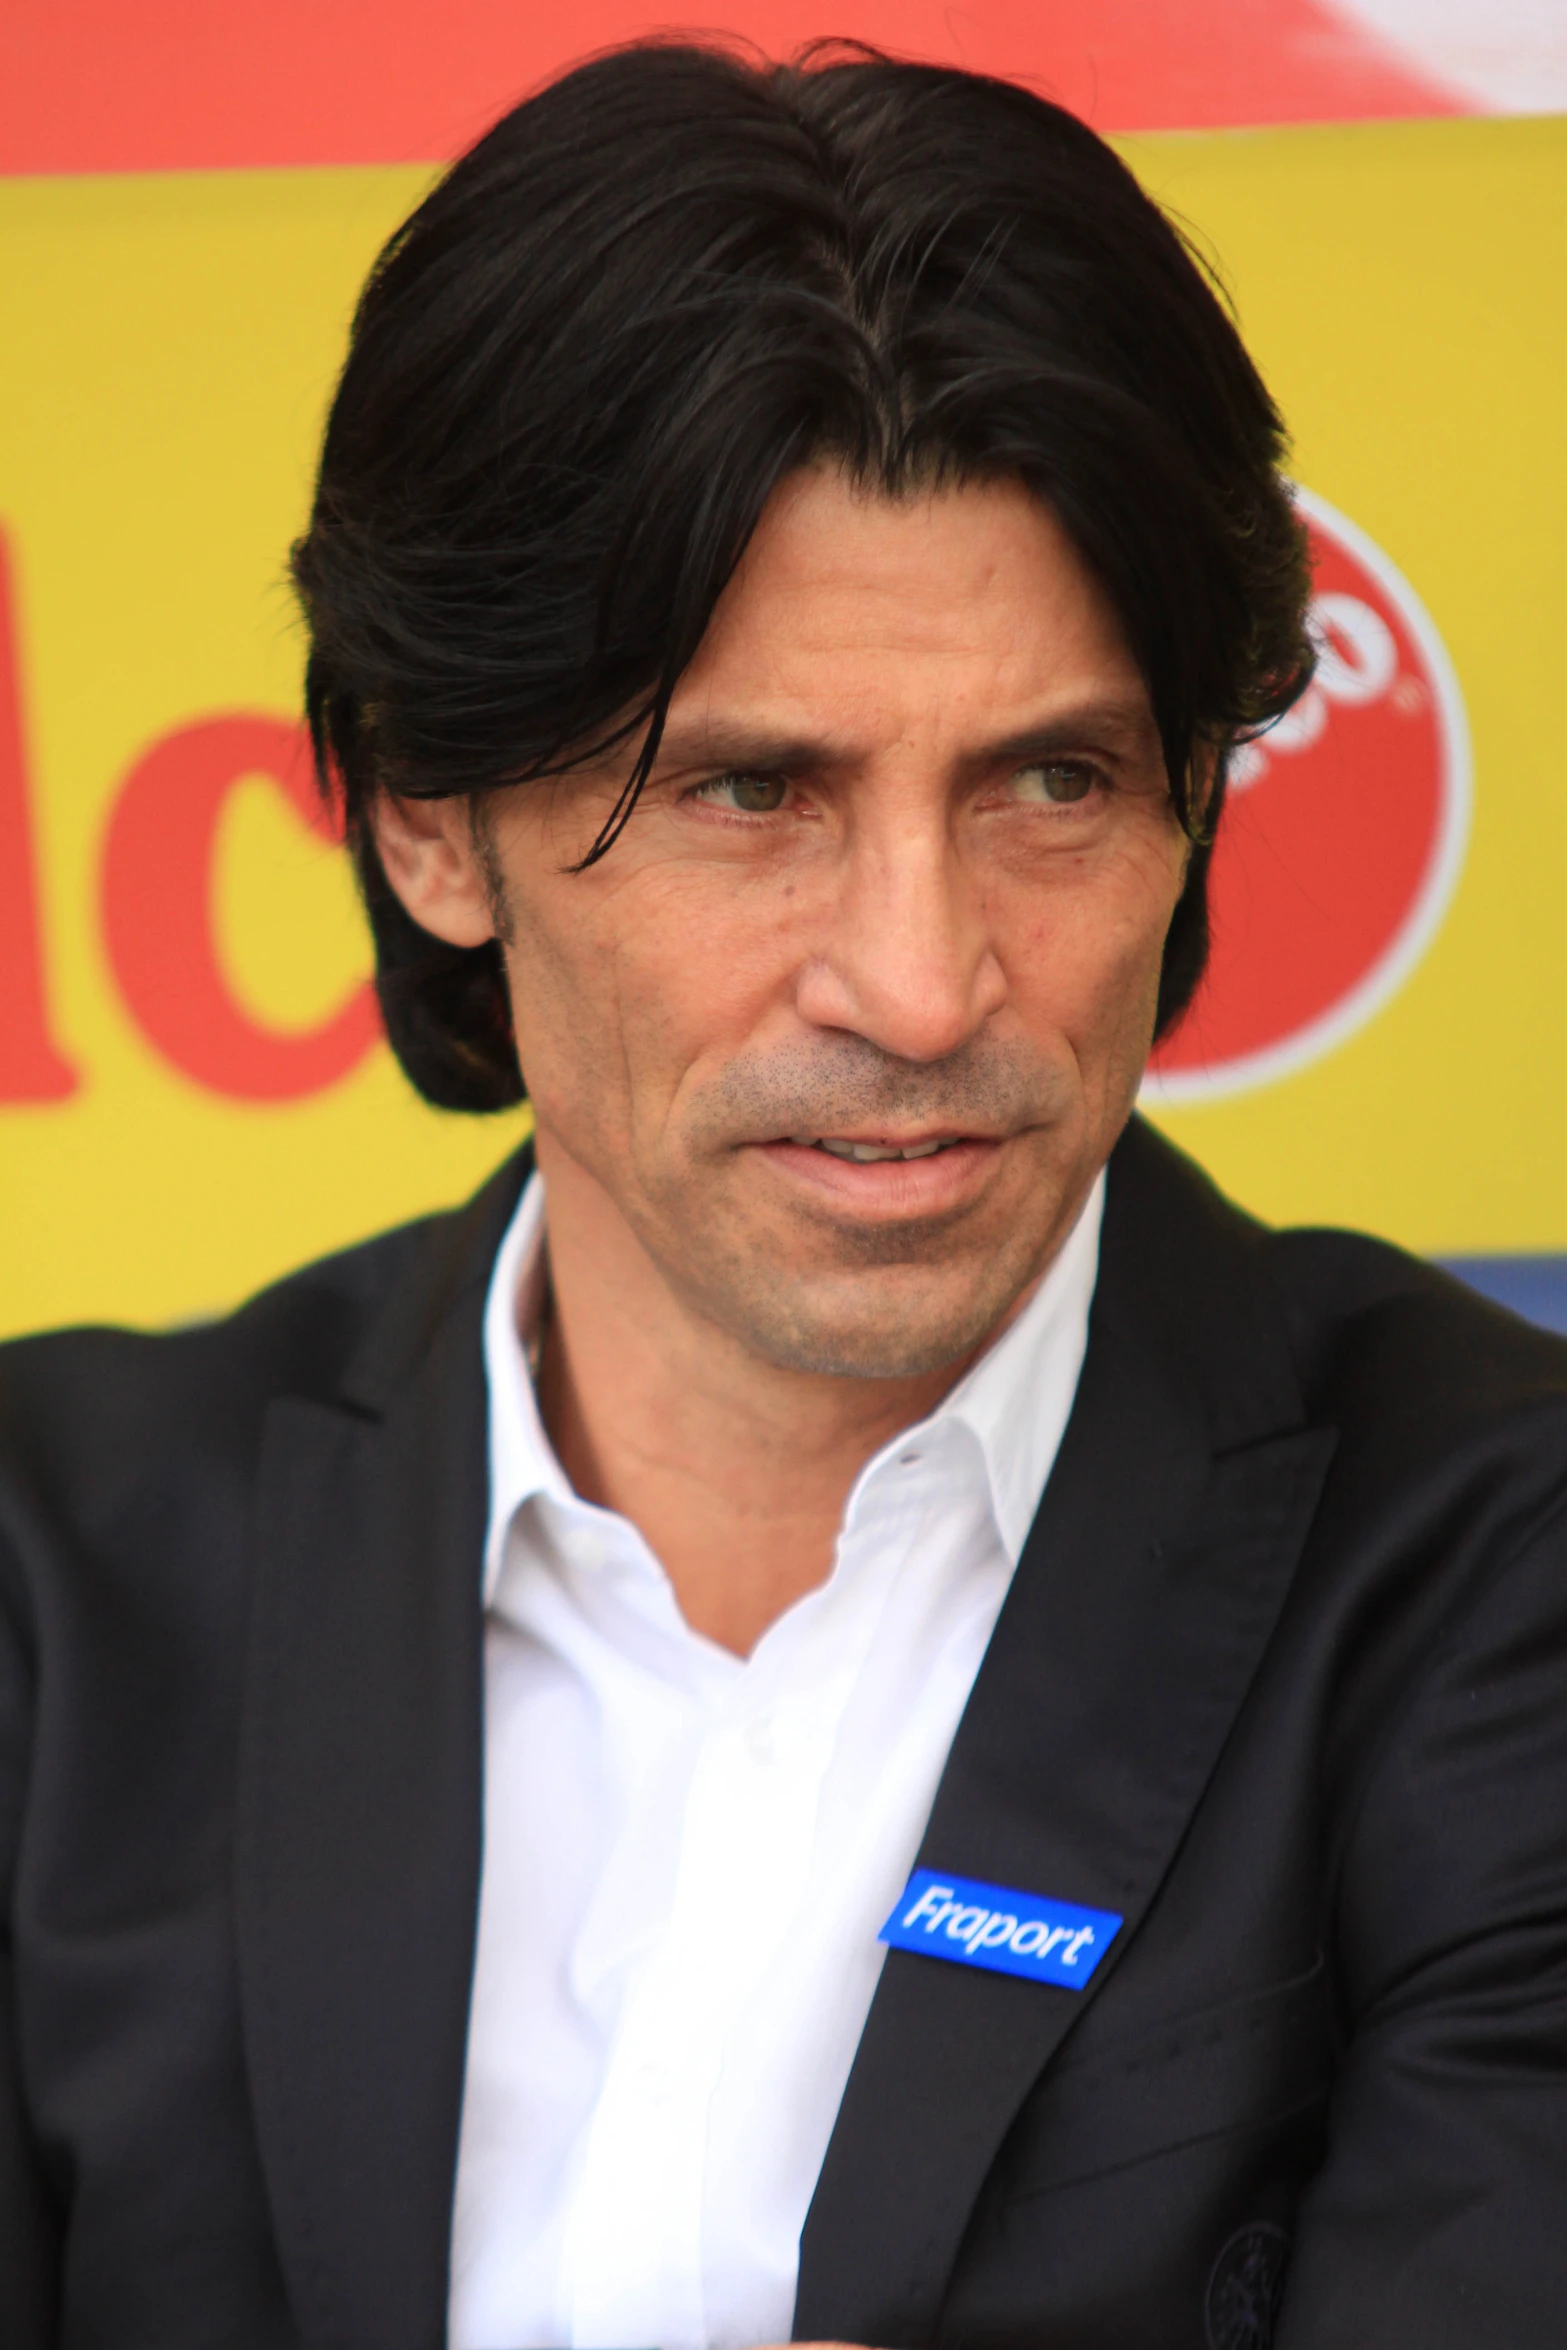 a man in a black suit with a white shirt and a pepsi logo on his jacket